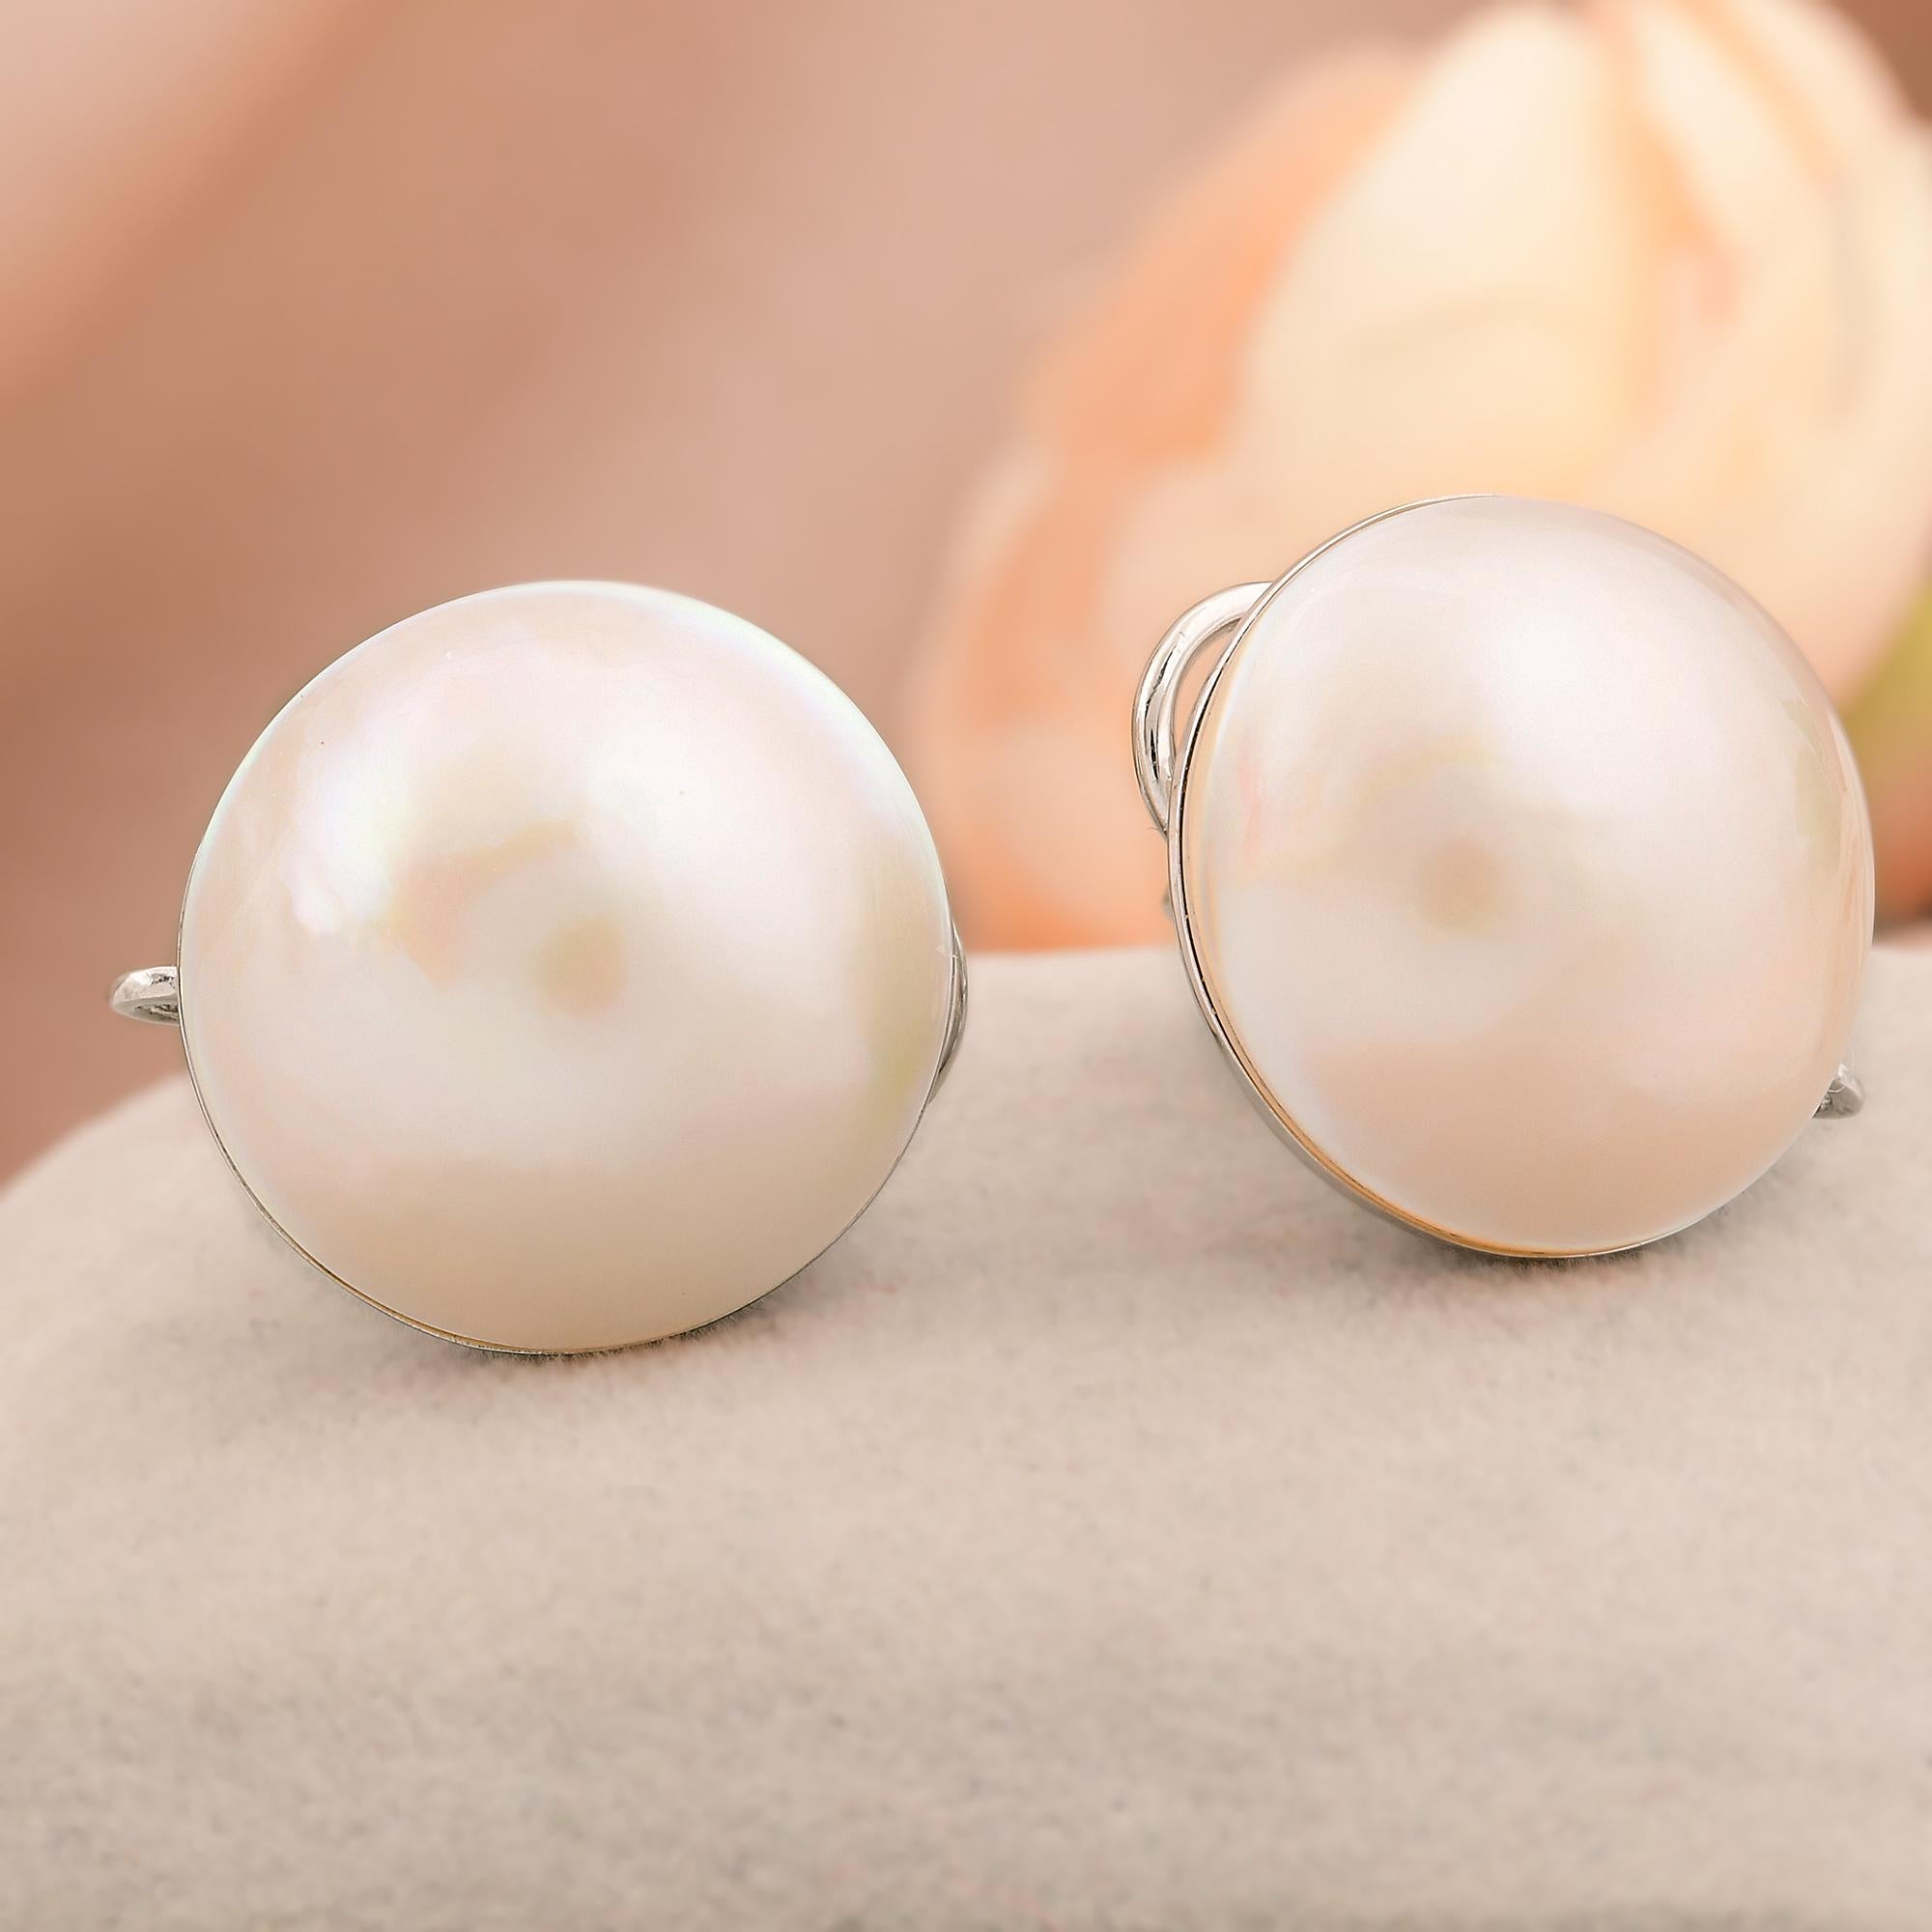 Modern Natural 23.86 Carat Pearl Gemstone Stud Earrings Solid 14k White Gold Jewelry For Sale